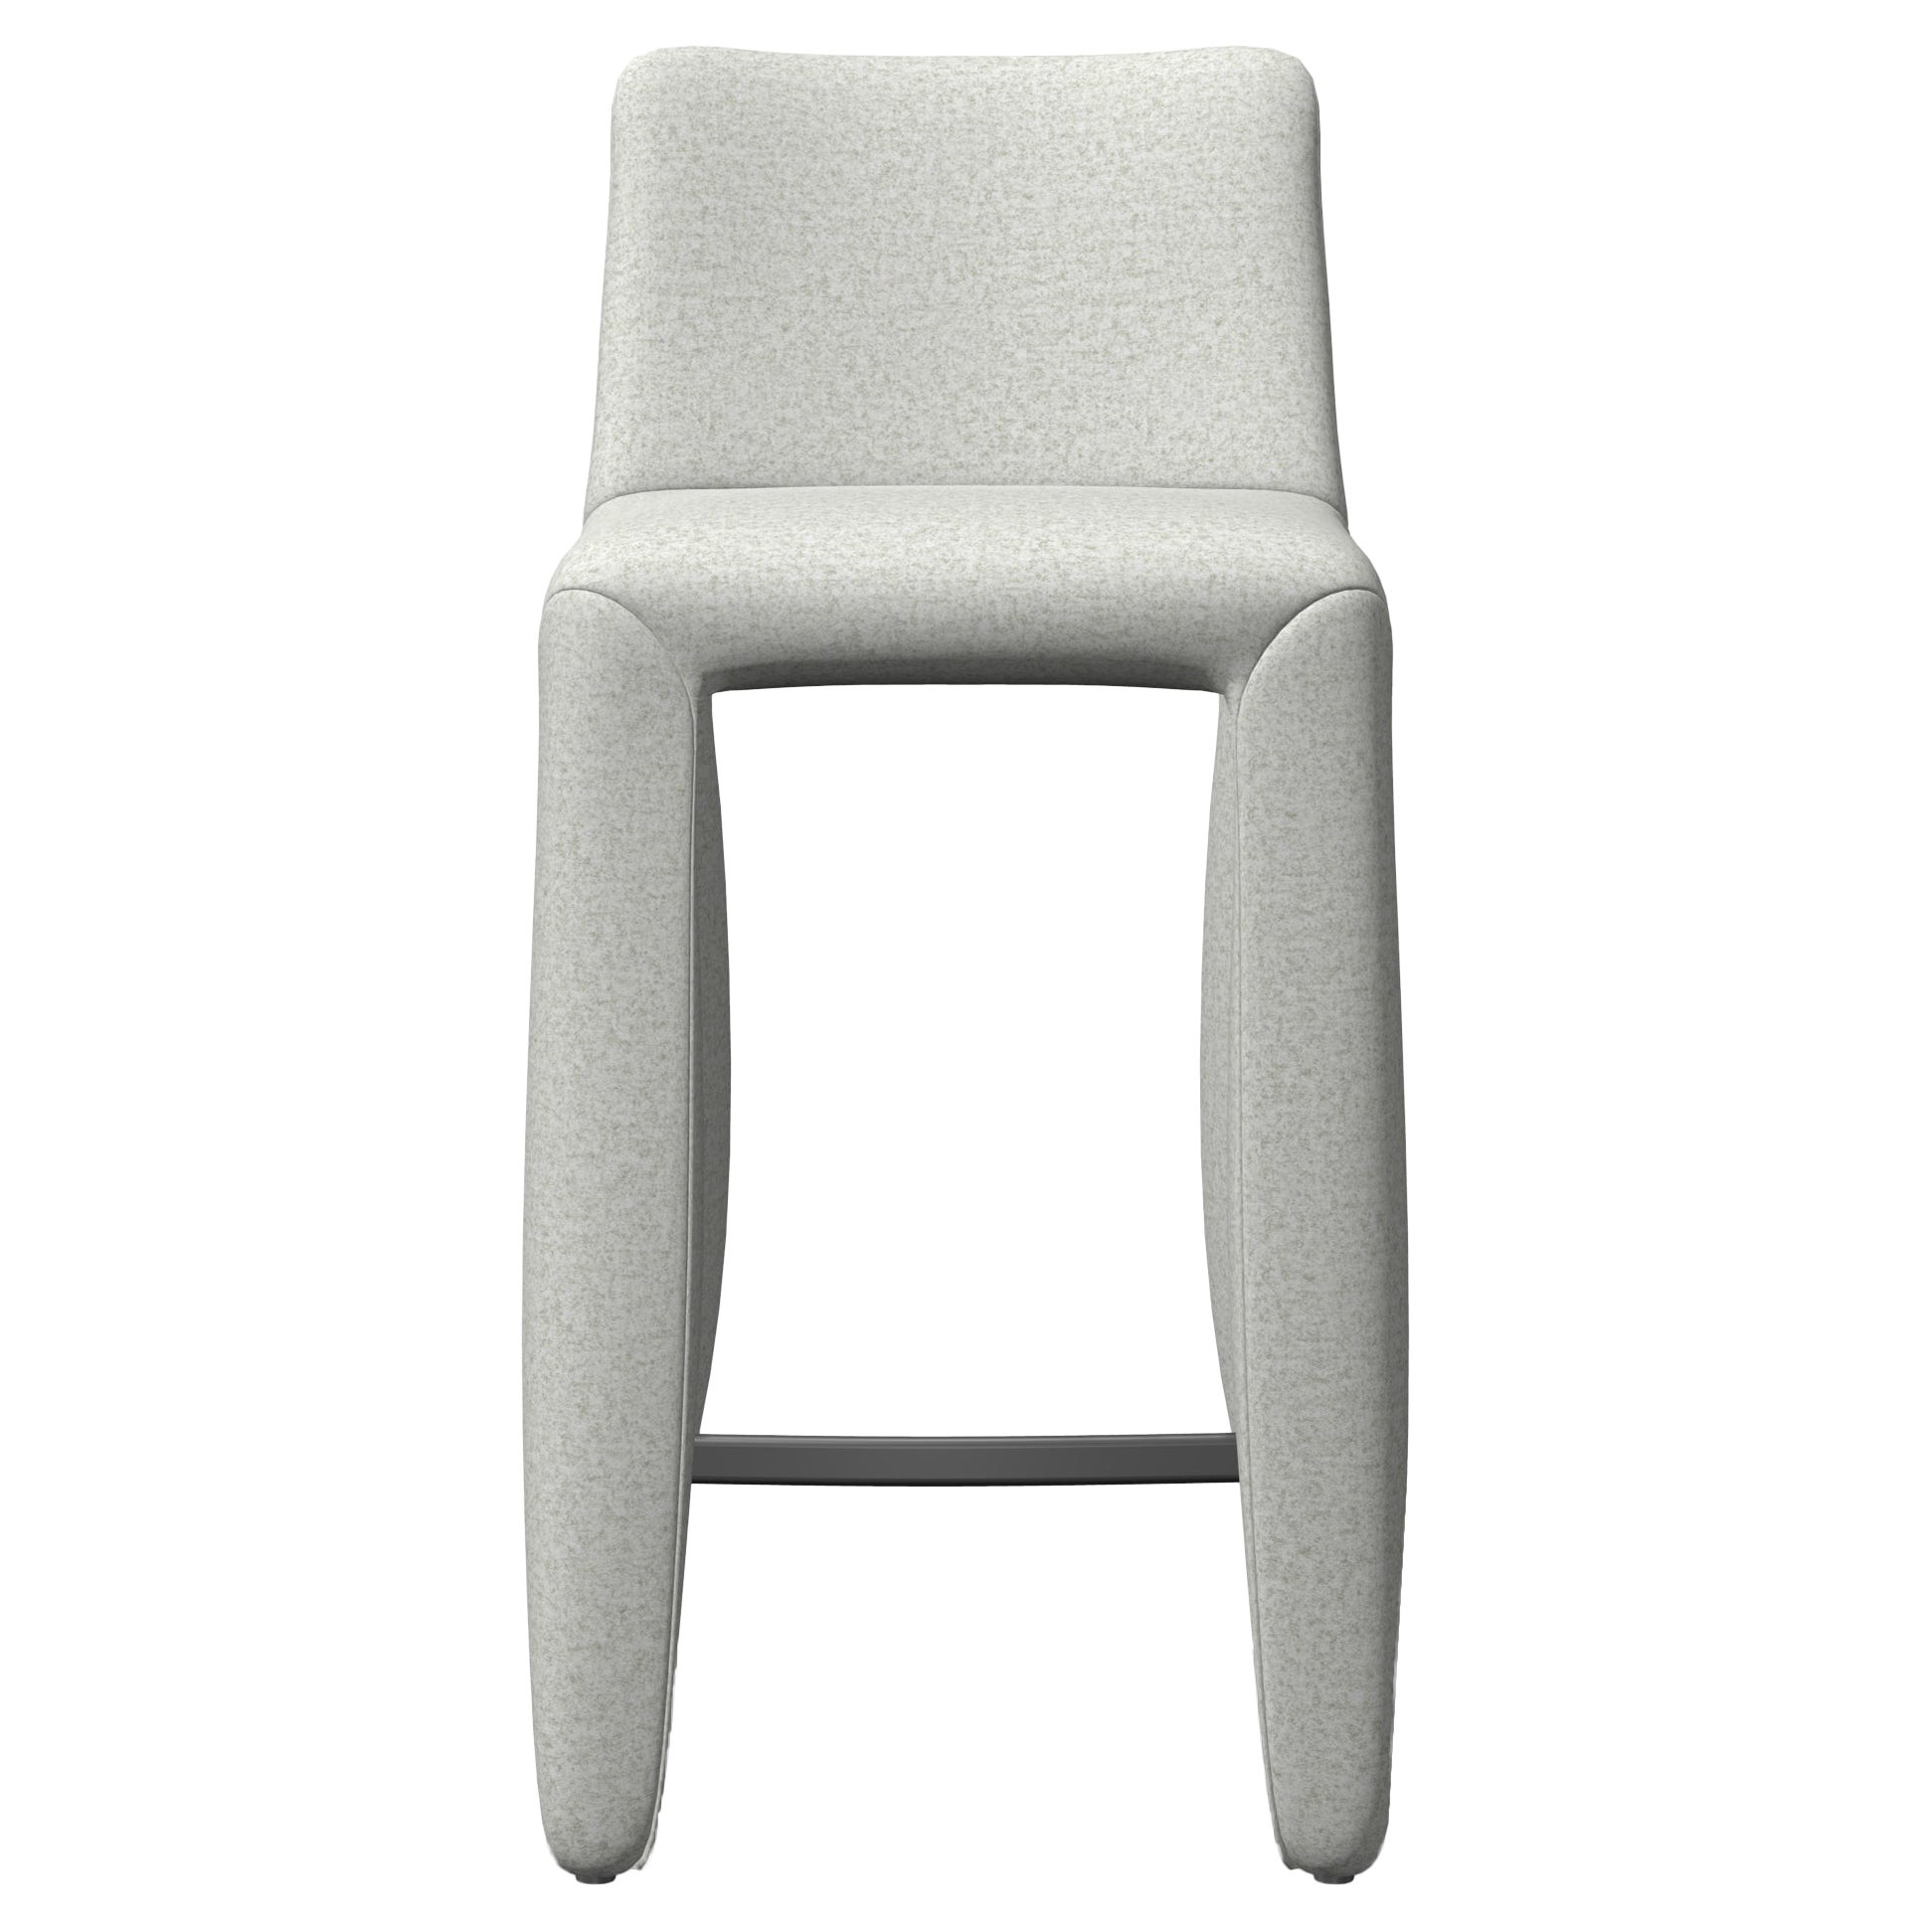 Moooi Monster Naked Low Barstool in Tonica 2, 111 by Marcel Wanders Studio For Sale